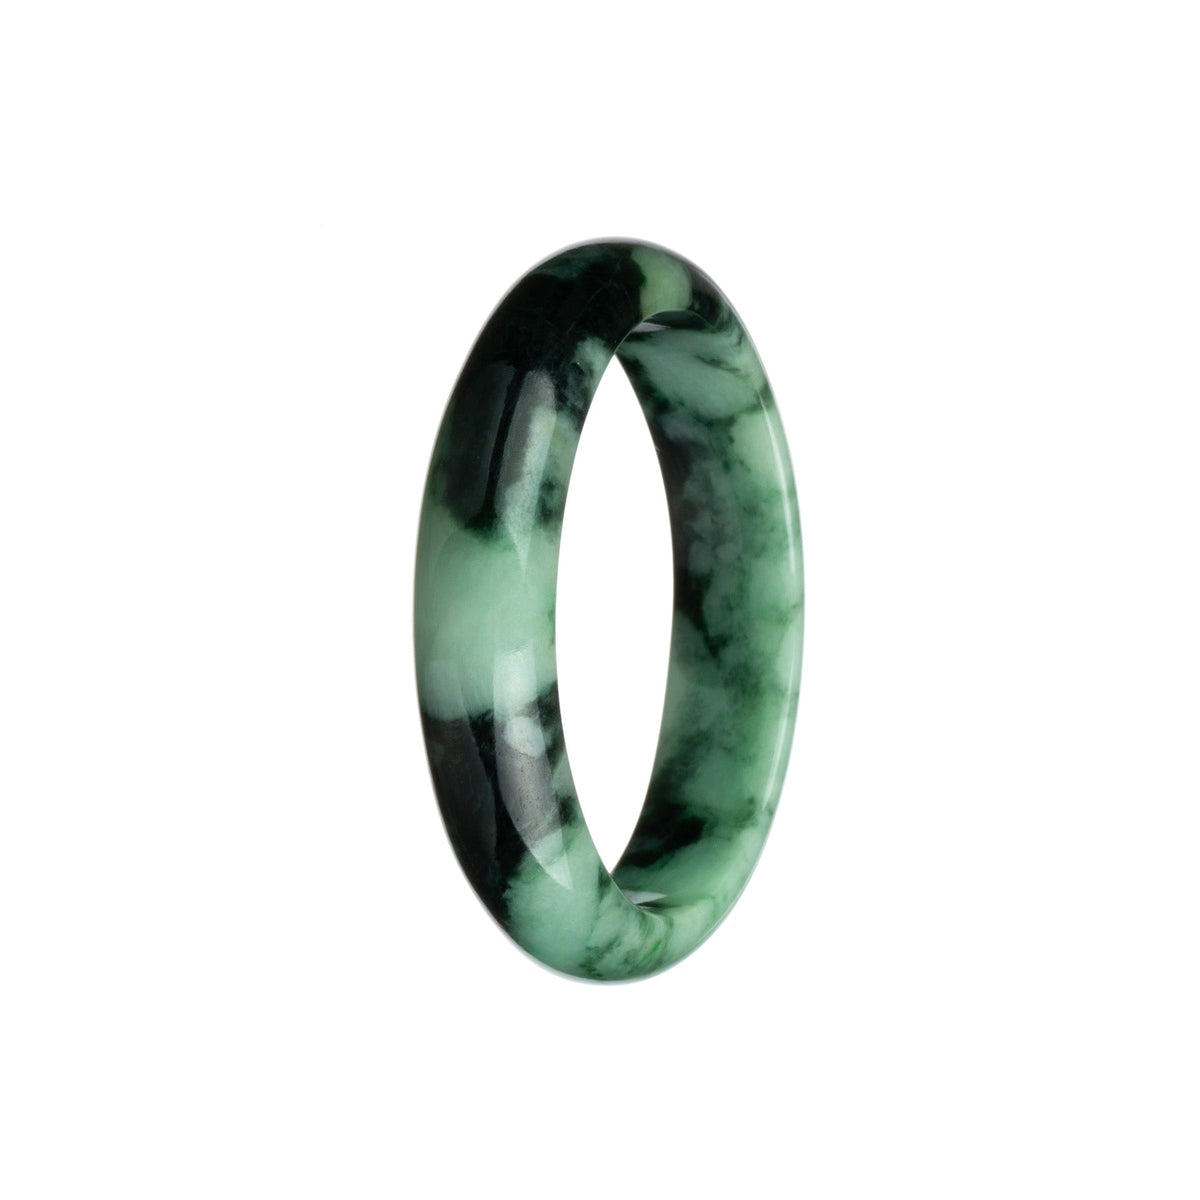 A half-moon shaped jadeite bangle bracelet with a beautiful green and black pattern.